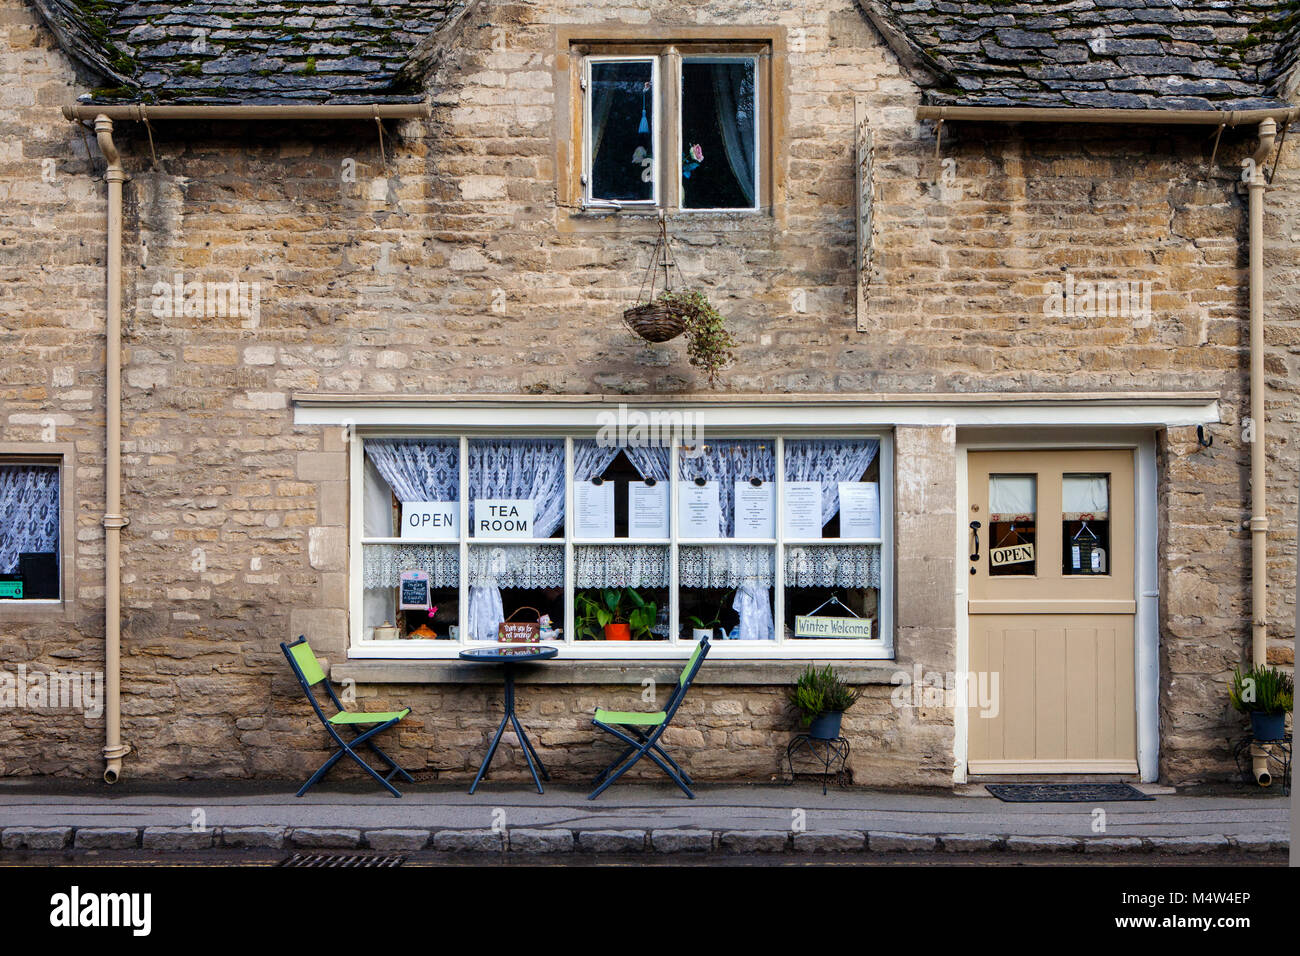 BIBURY, UK - FEBRUARY 15th, 2018: Tea room in Bibury: Bibury is a typical Costwold village with traditional english architecture. Stock Photo